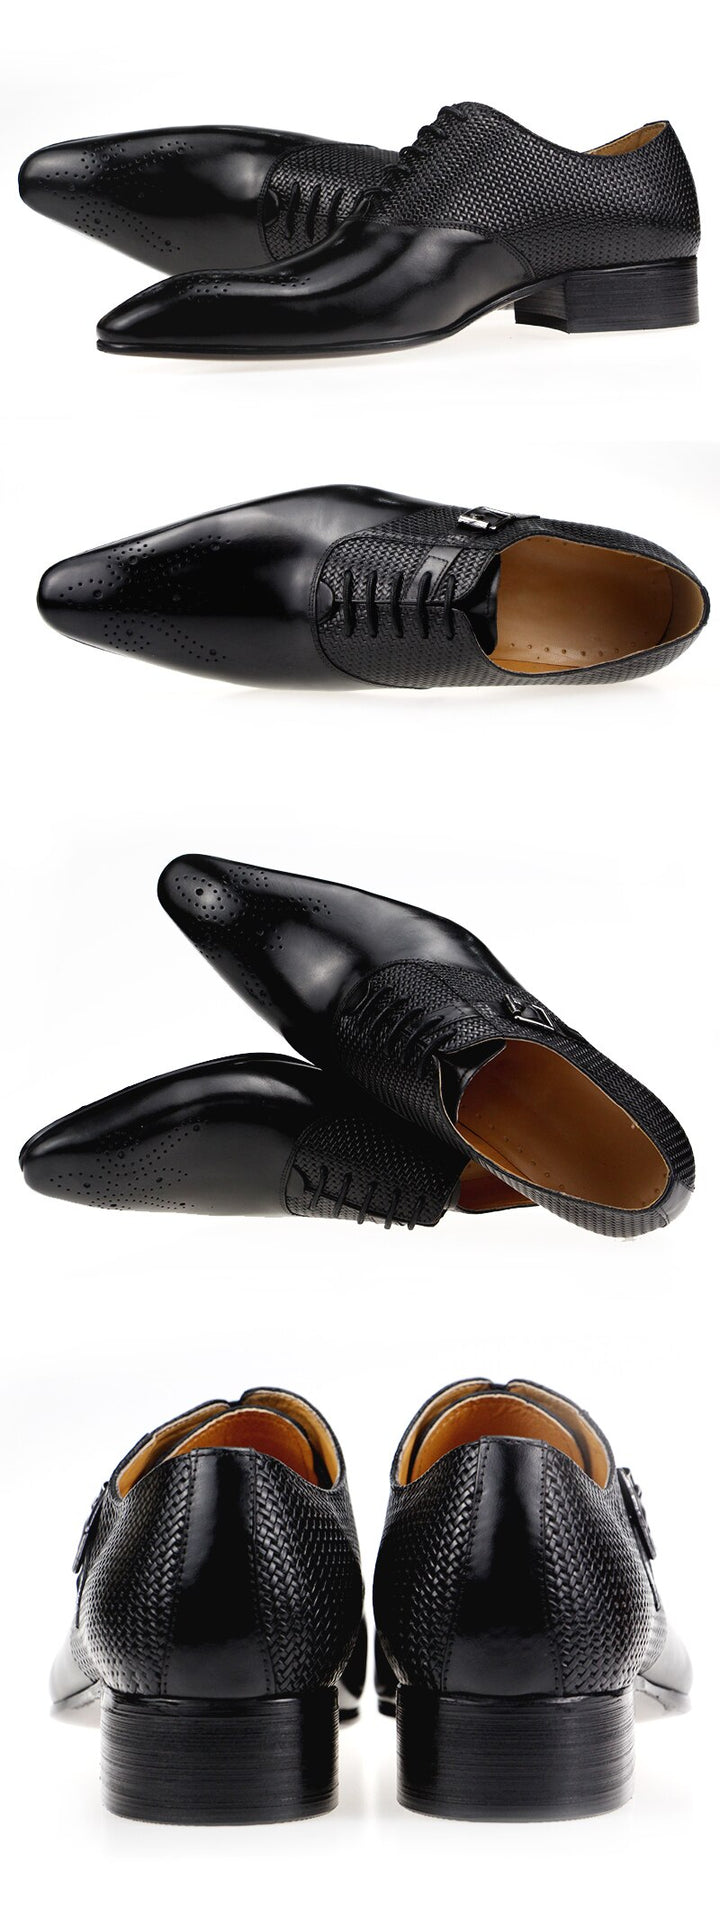 Exquisite Buckle Men's Genuine Leather Brogue Shoes| All For Me Today